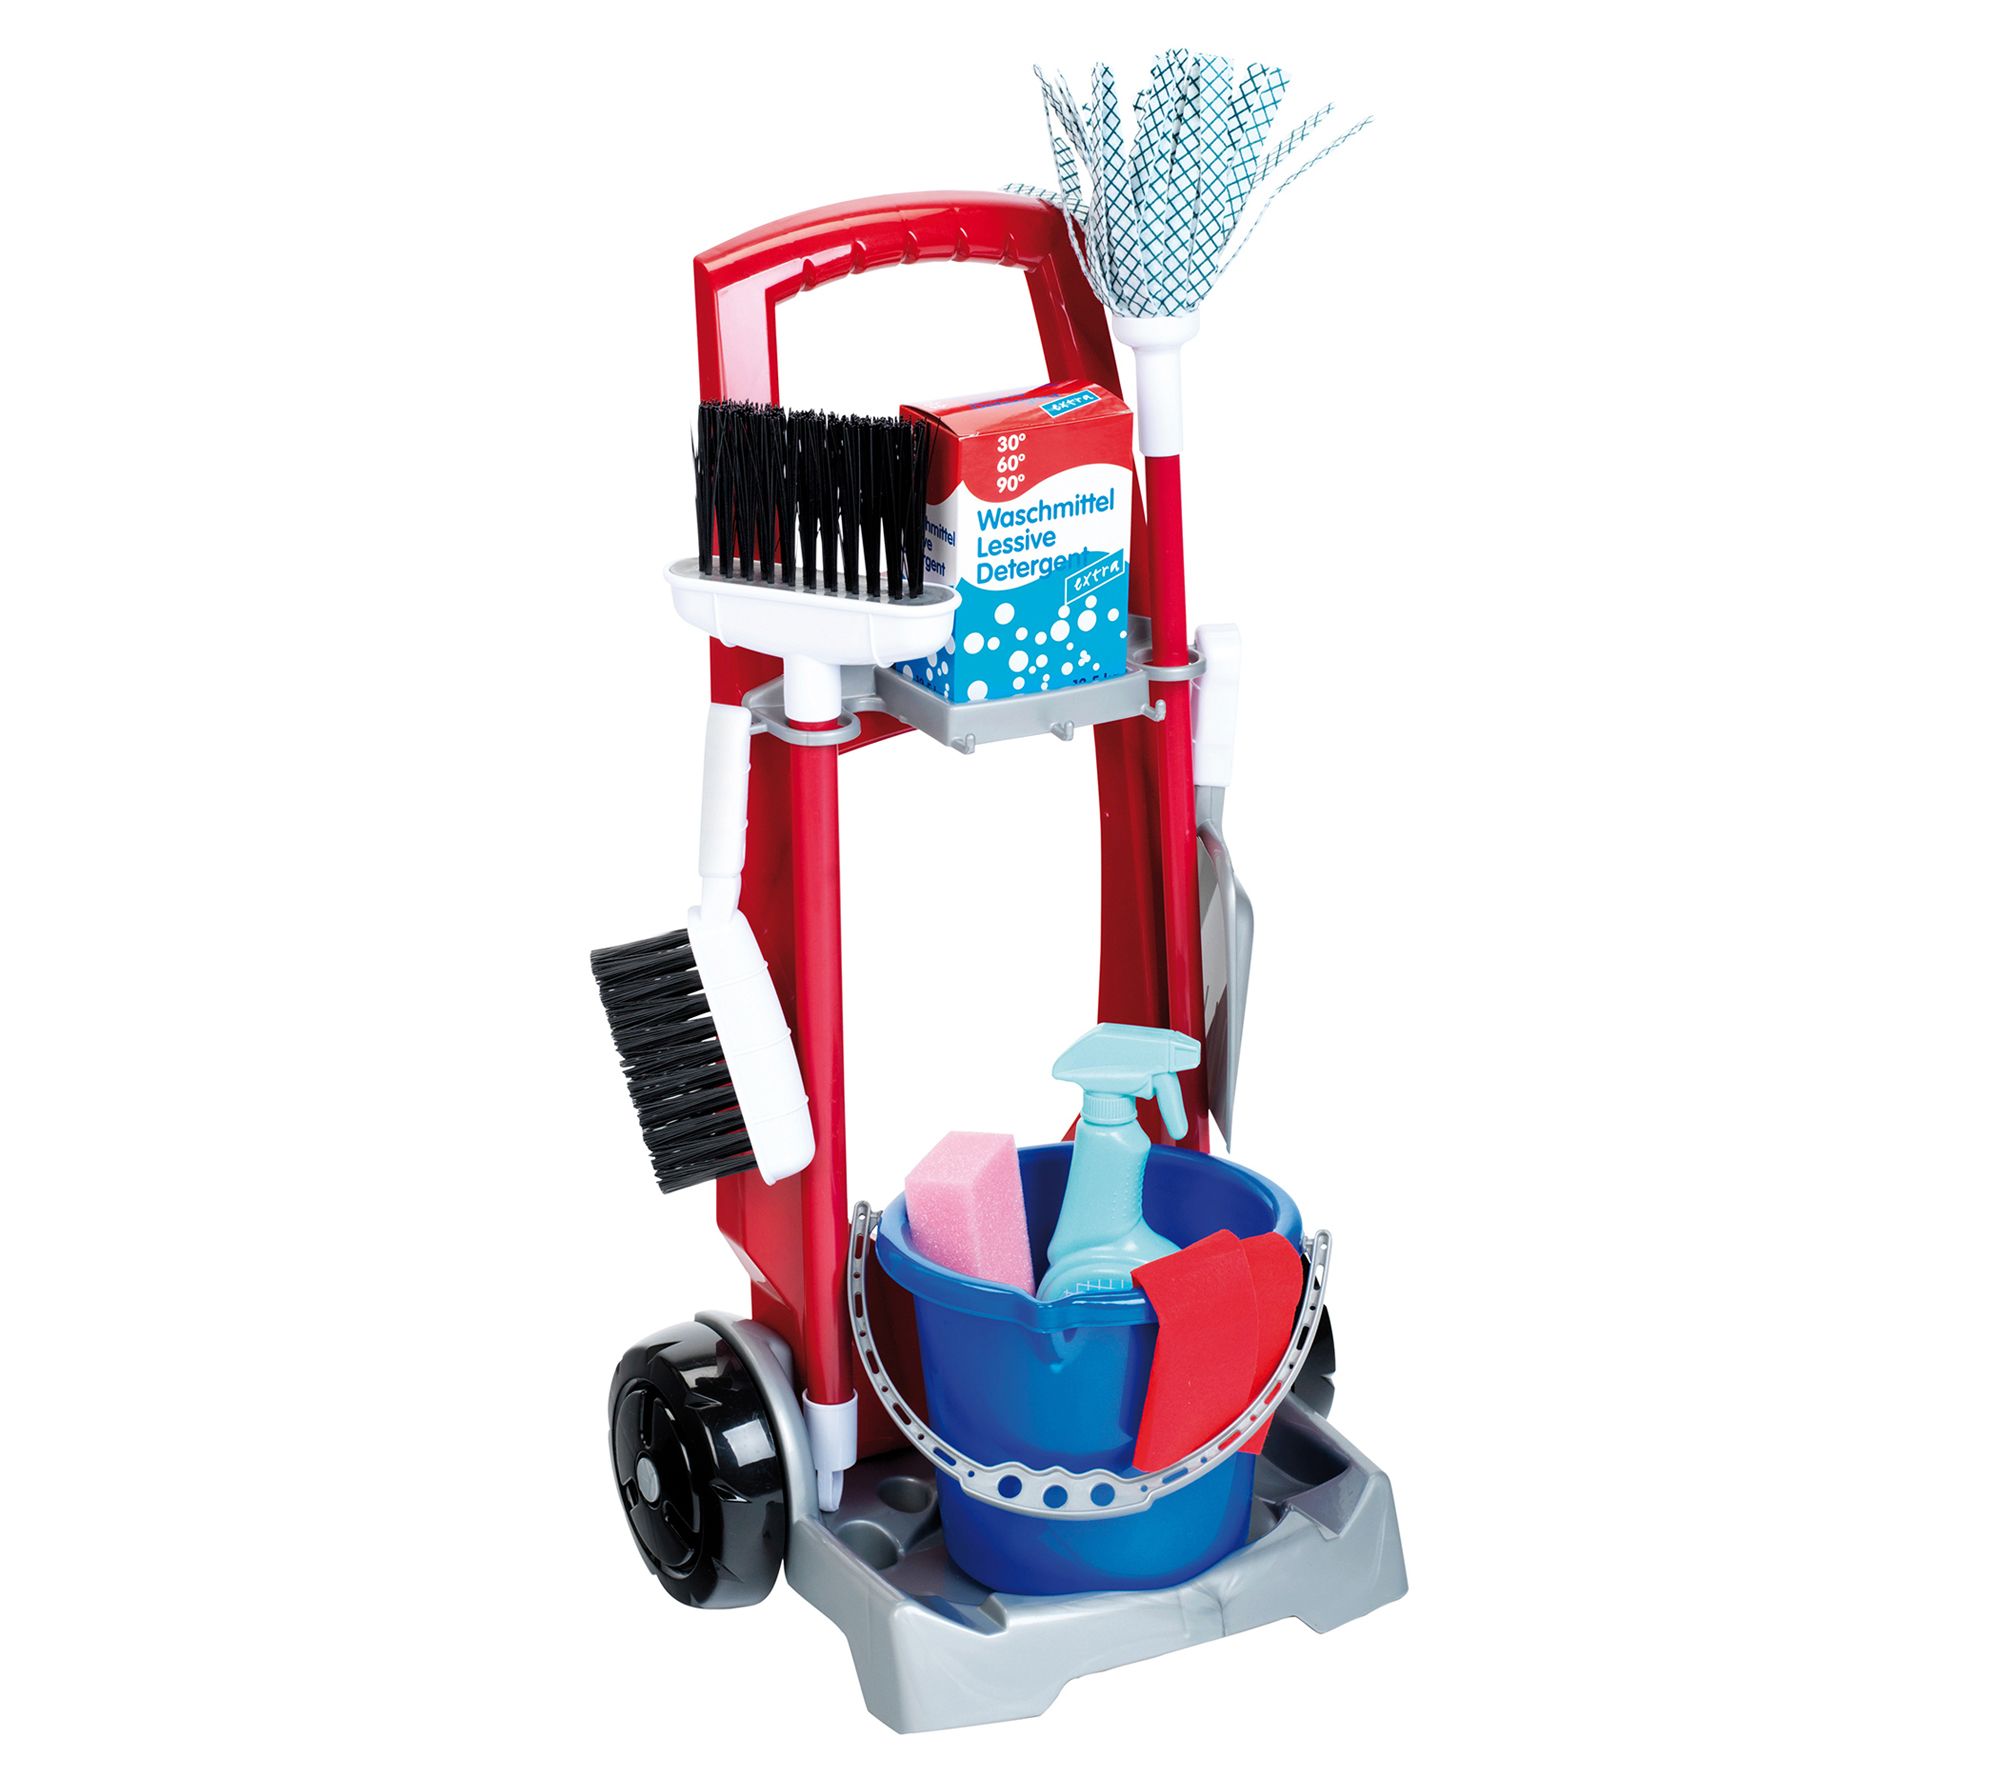 My First Cleaning Play Set with Lights & Sounds Vacuum, Broom, Mop and Pail